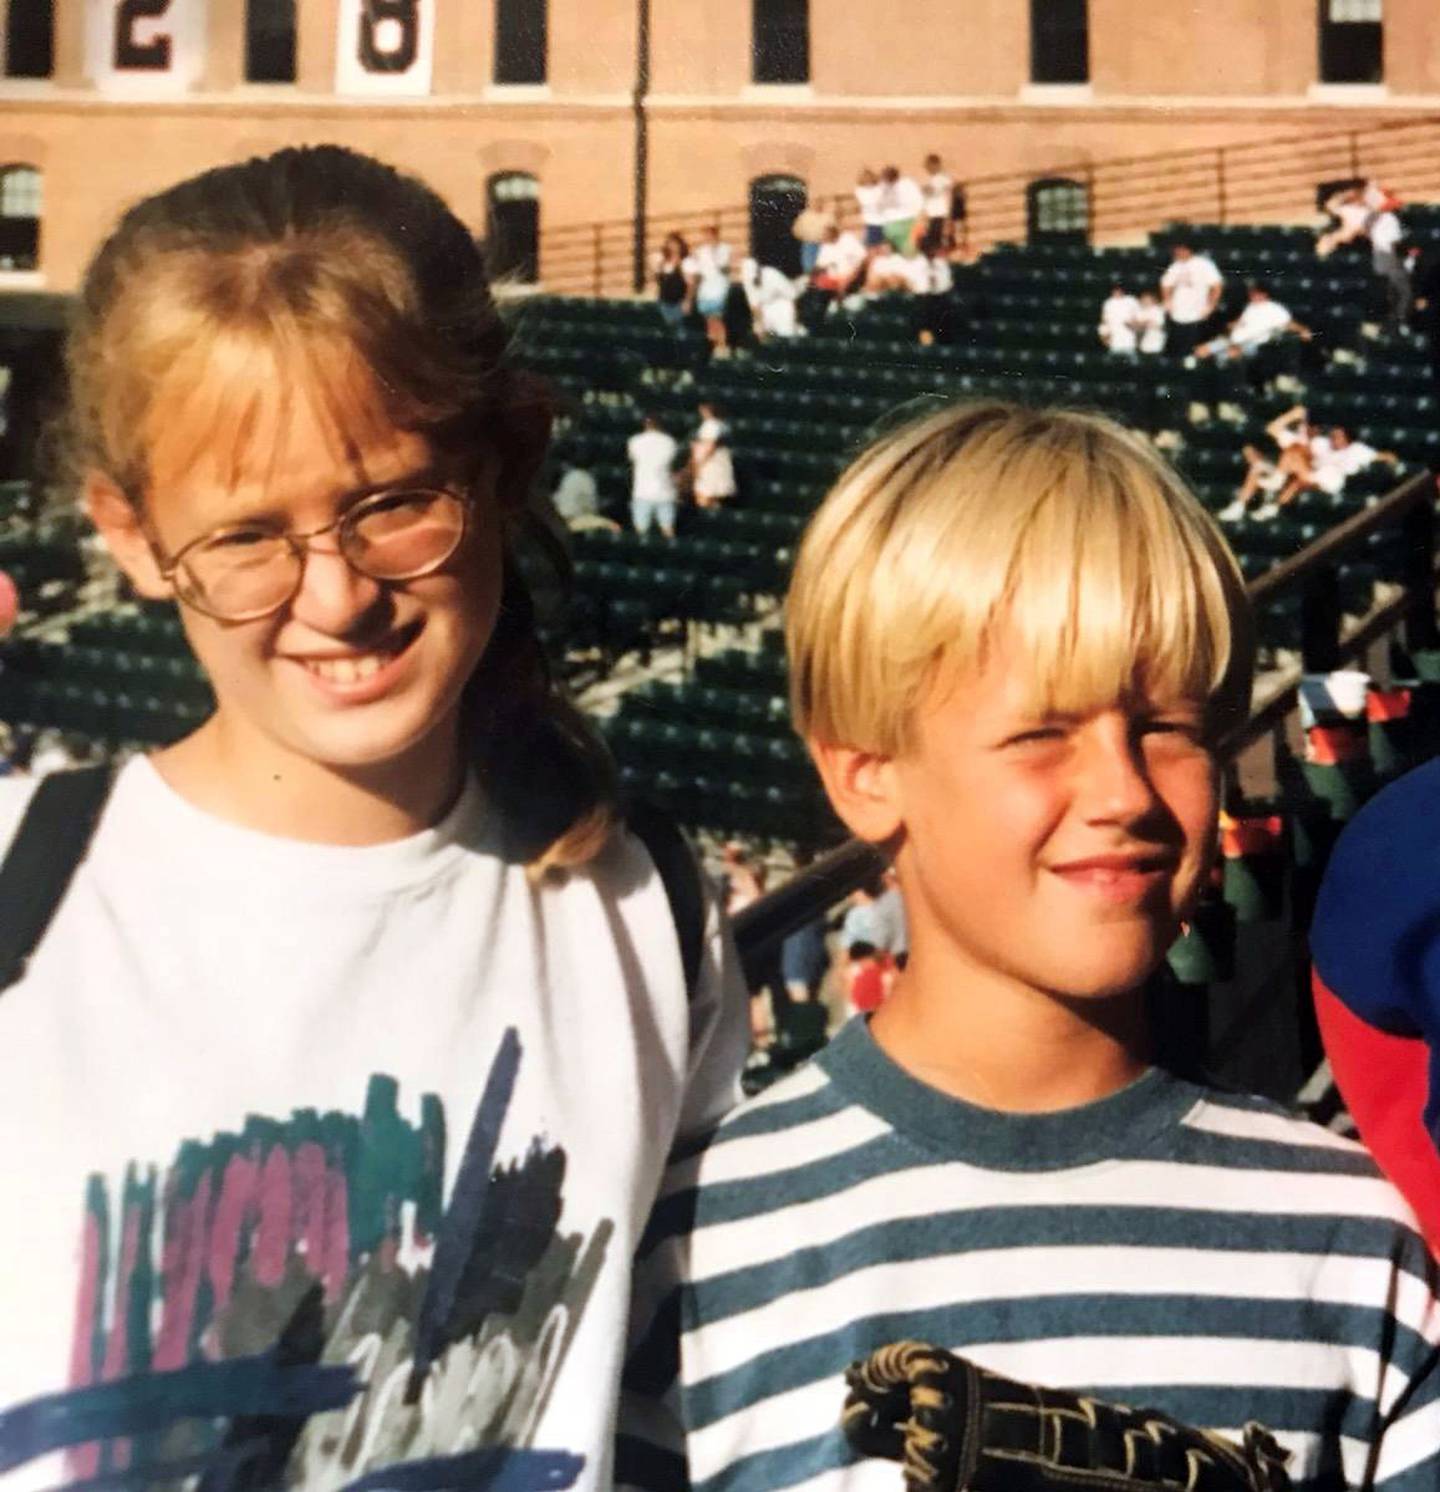 Courtney O’Malley and Danny O’Malley at Camden Yards in 1995.